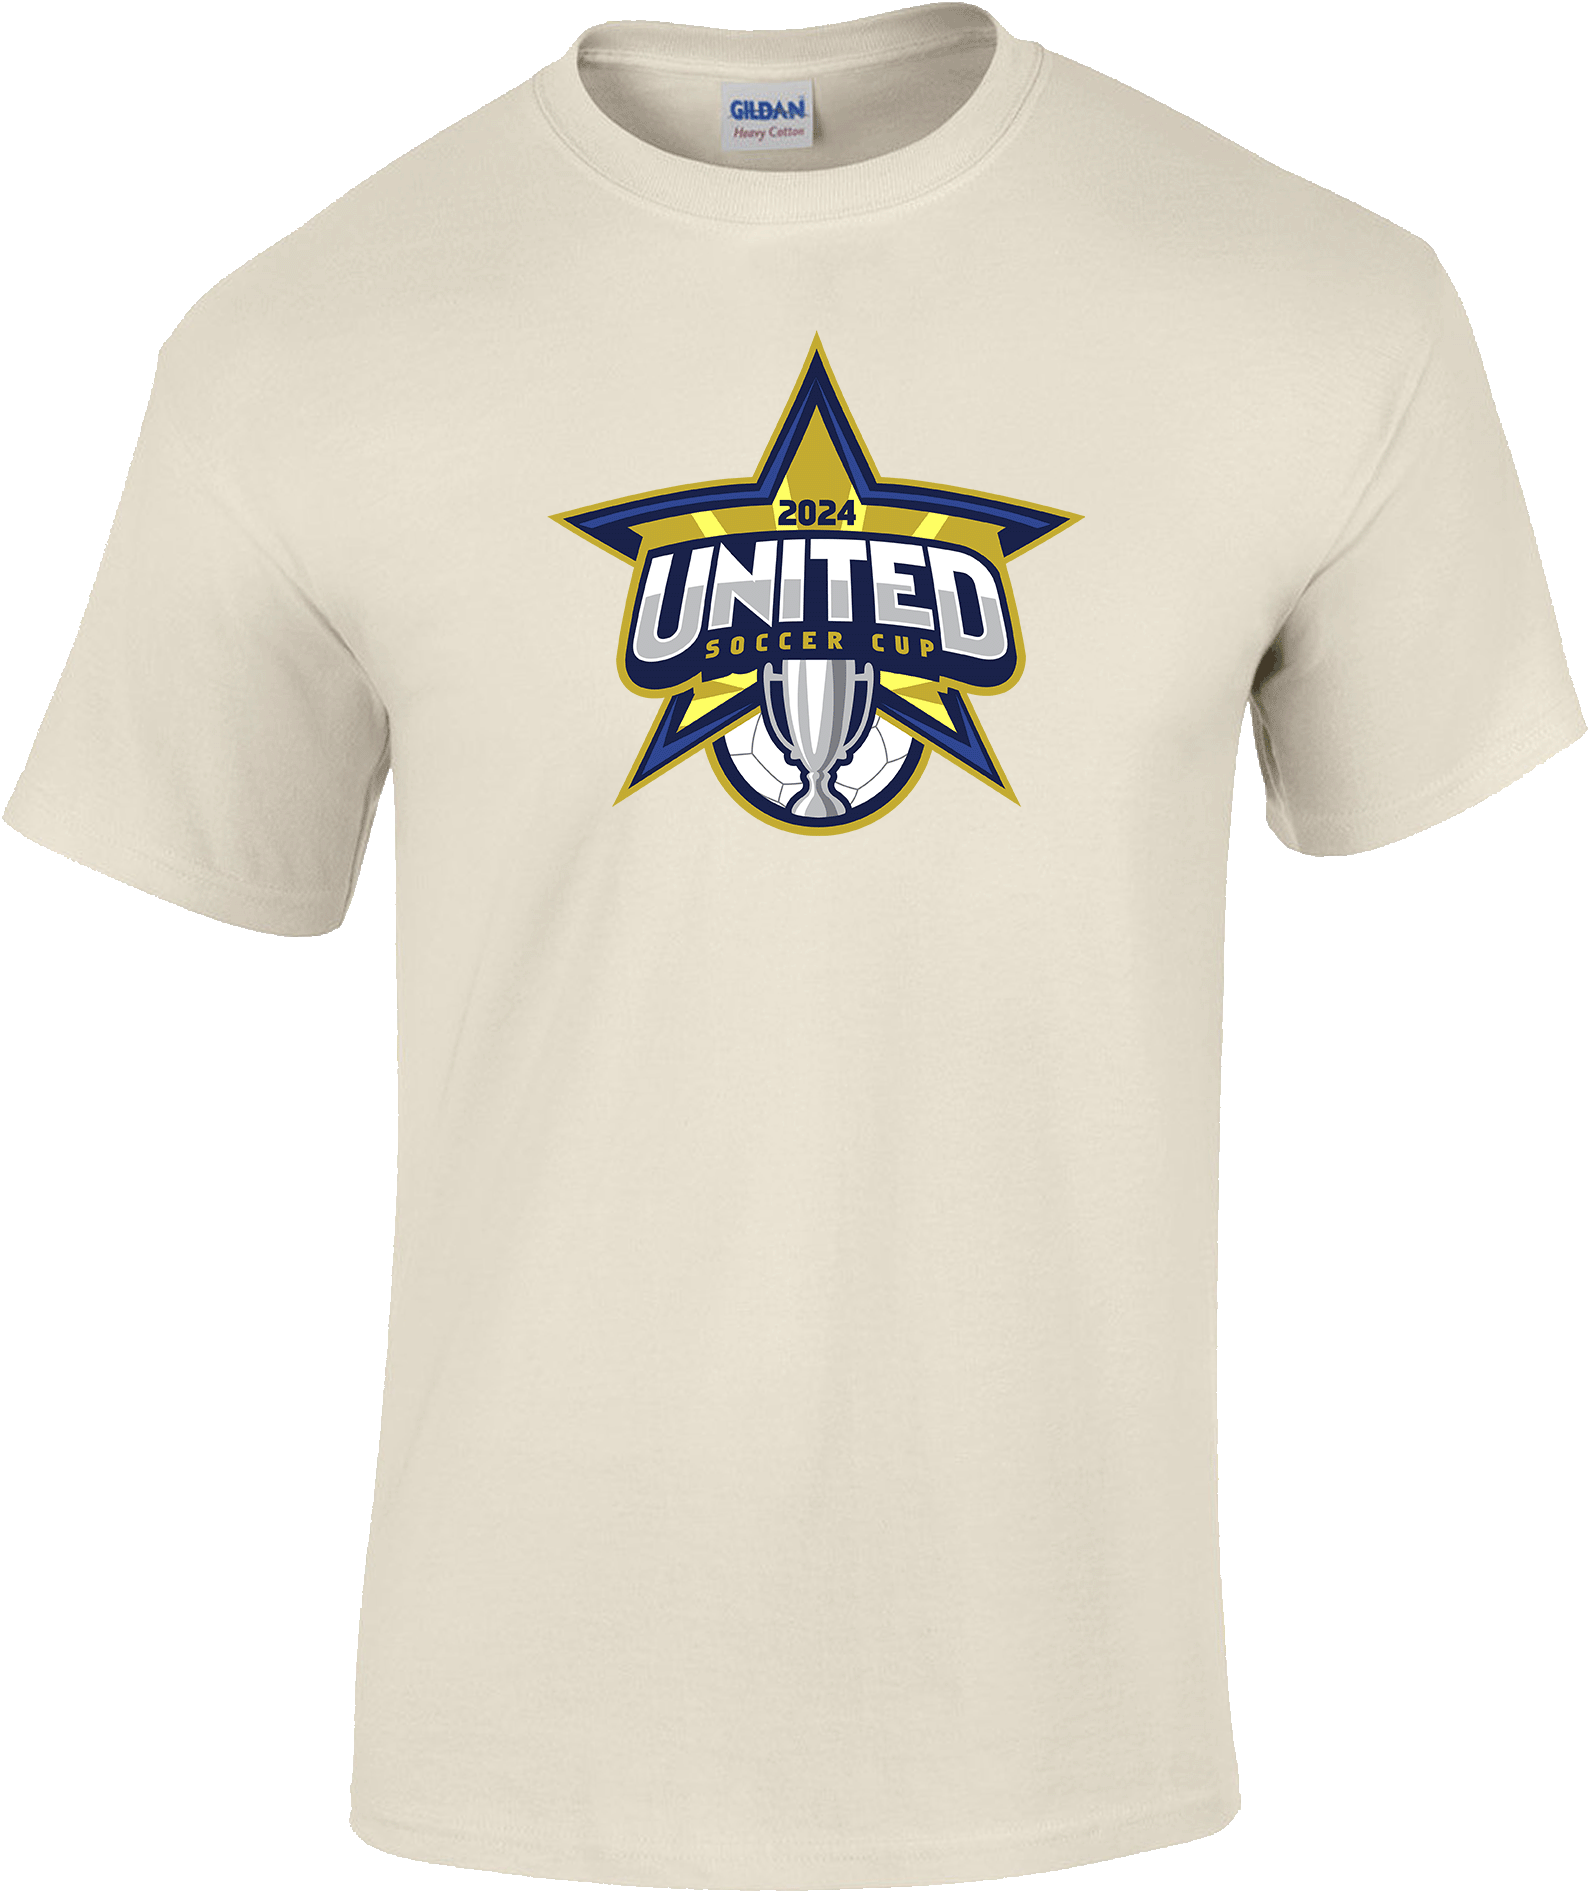 Short Sleeves - 2024 United Soccer Cup